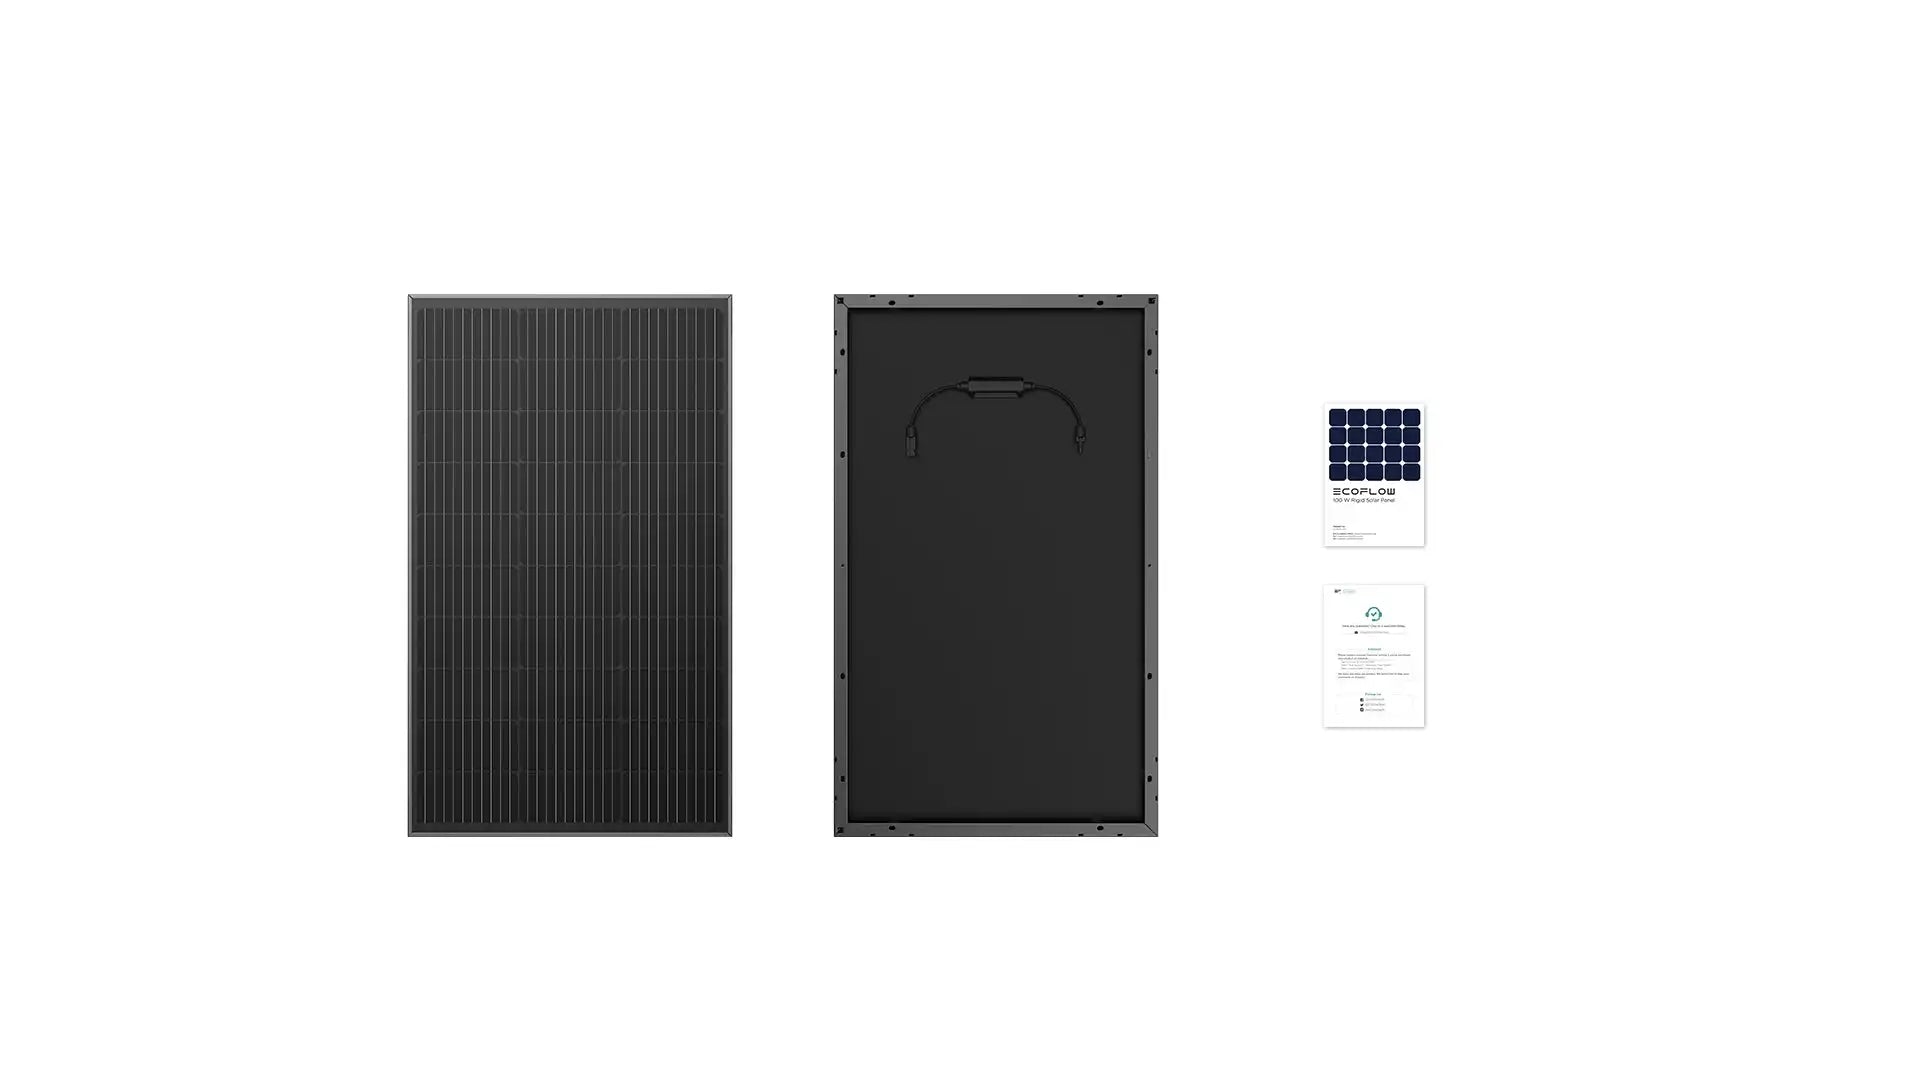 EcoFlow 2PCS 100W Rigid Solar Panel, Rugged and durable, this weatherproof panel withstands storms while maintaining excellent performance and style.